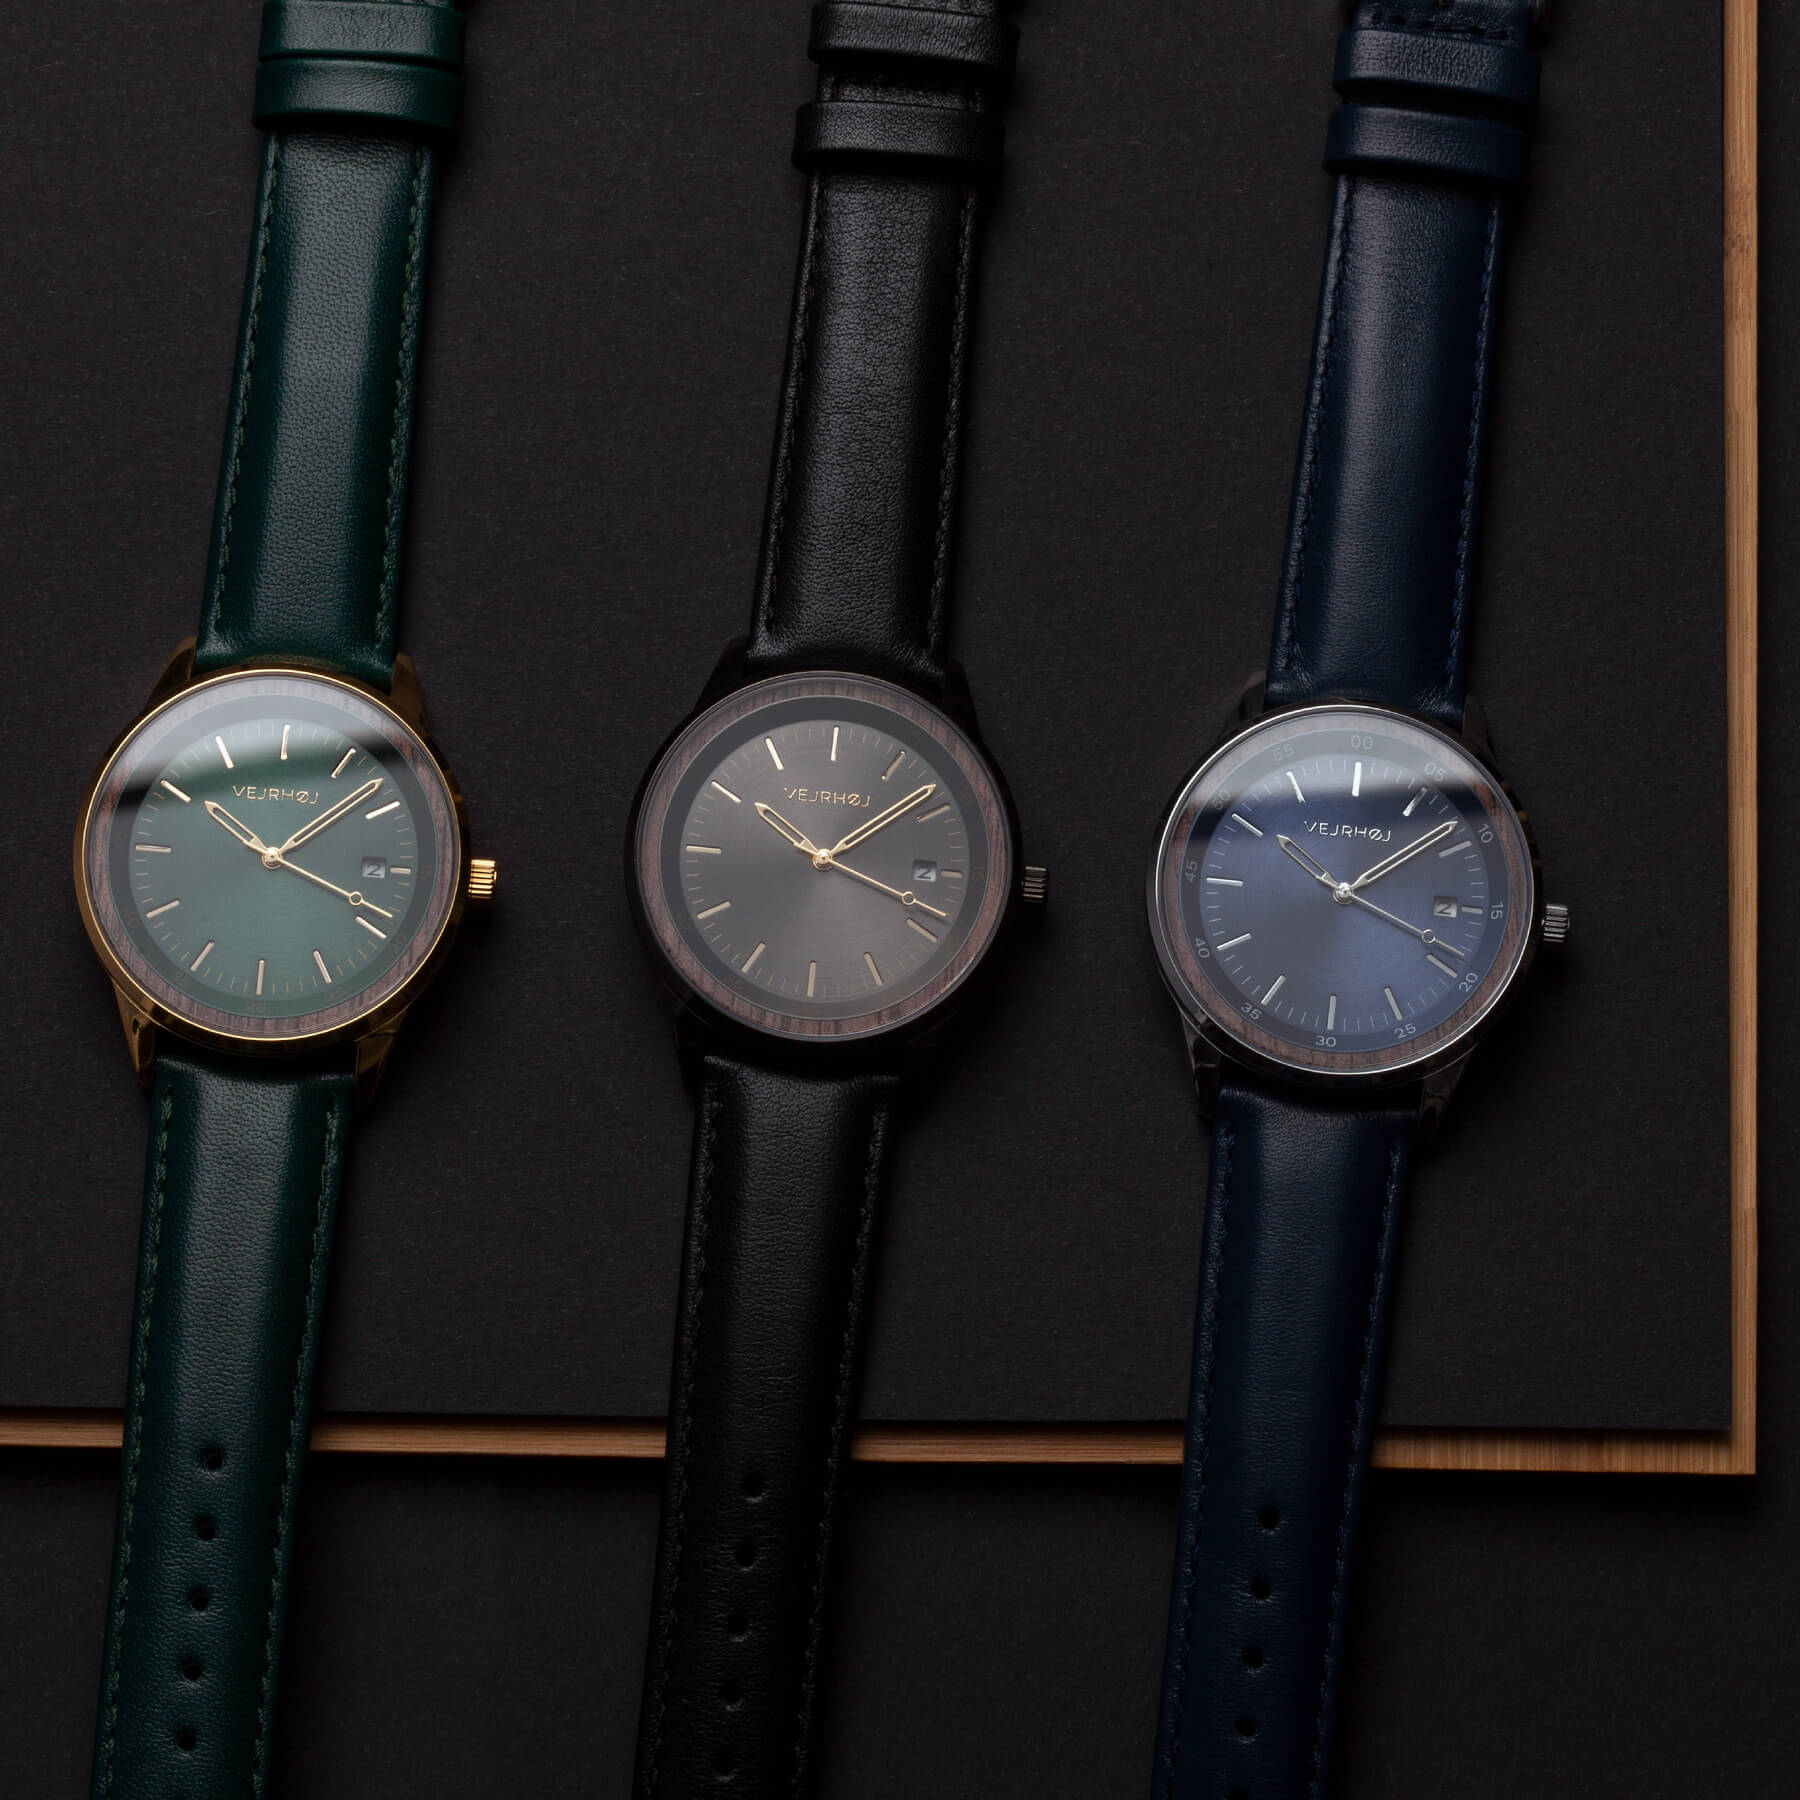 simple automatic watches in black, blue and green with wooden parts